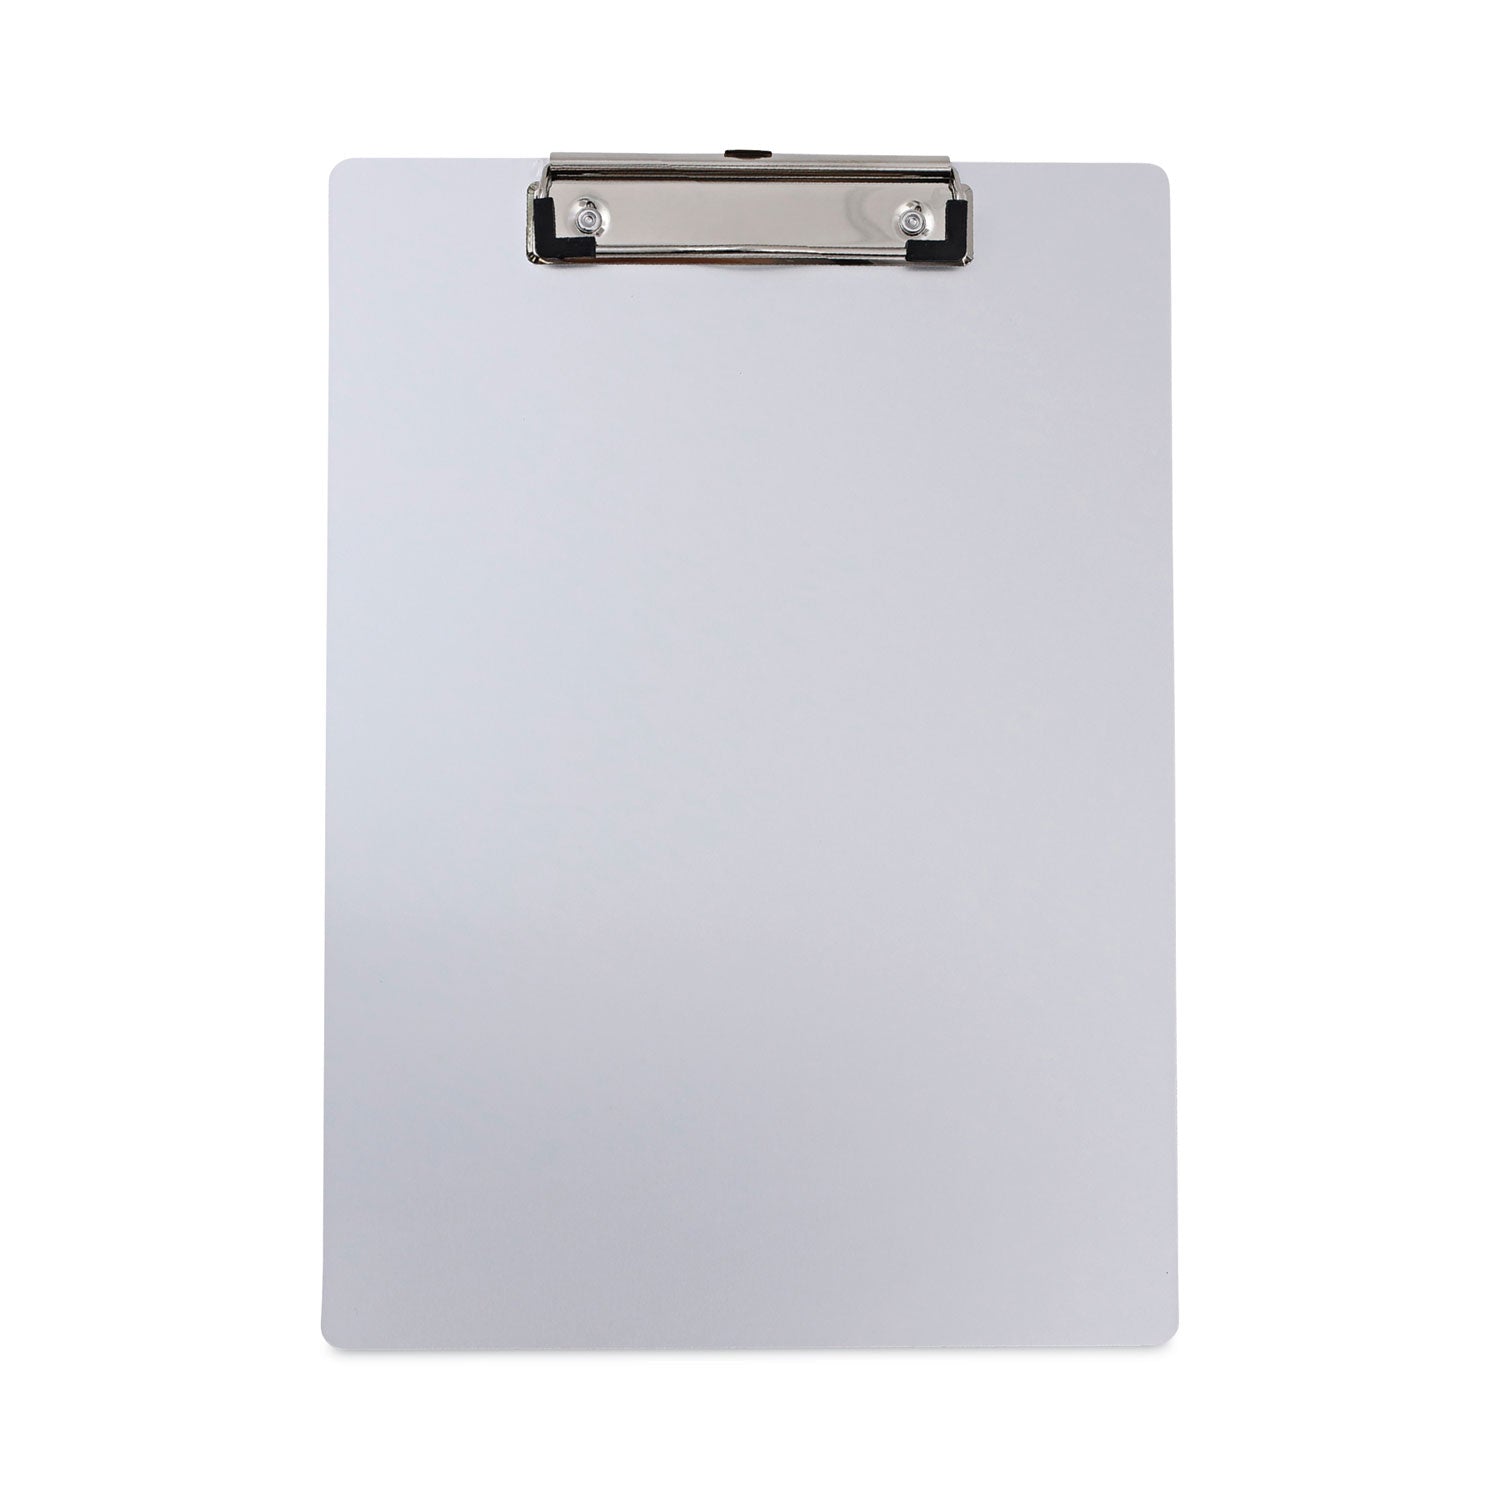 aluminum-clipboard-with-low-profile-clip-05-clip-capacity-holds-85-x-11-sheets-aluminum_unv40301 - 1